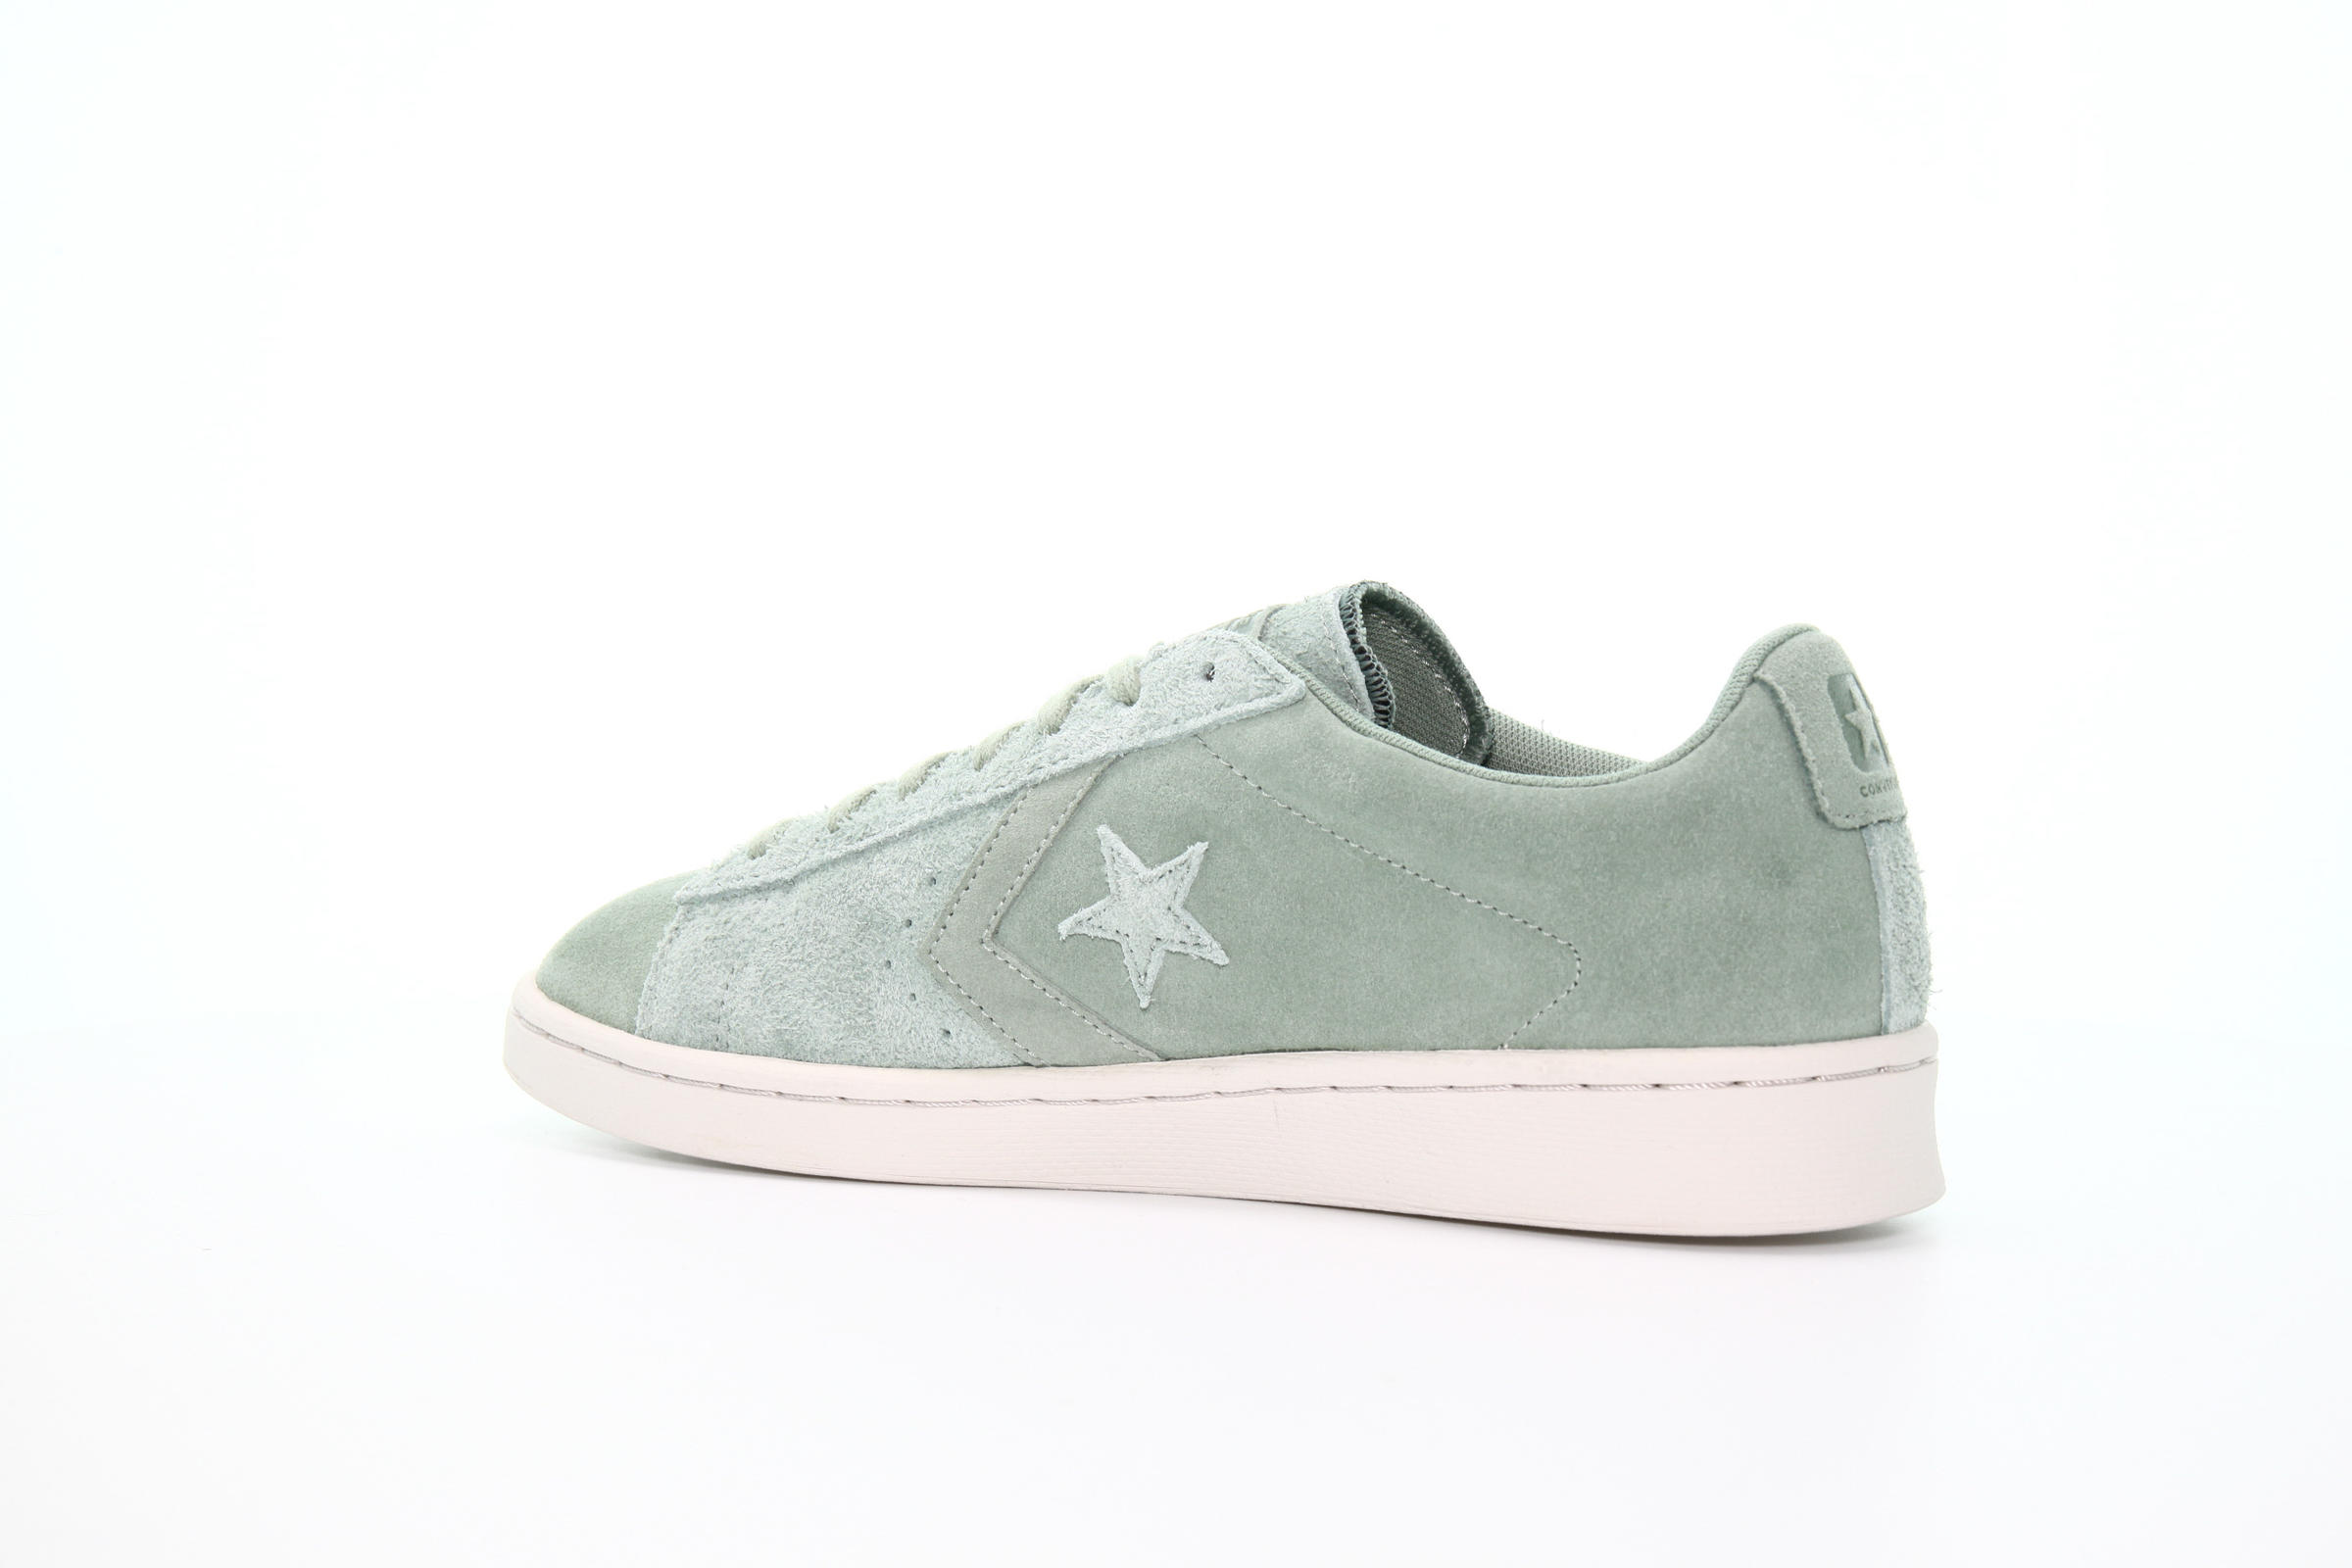 Converse x CONVERSE EARTH TONE SUEDE PRO LEATHER OX "LILY PAD"